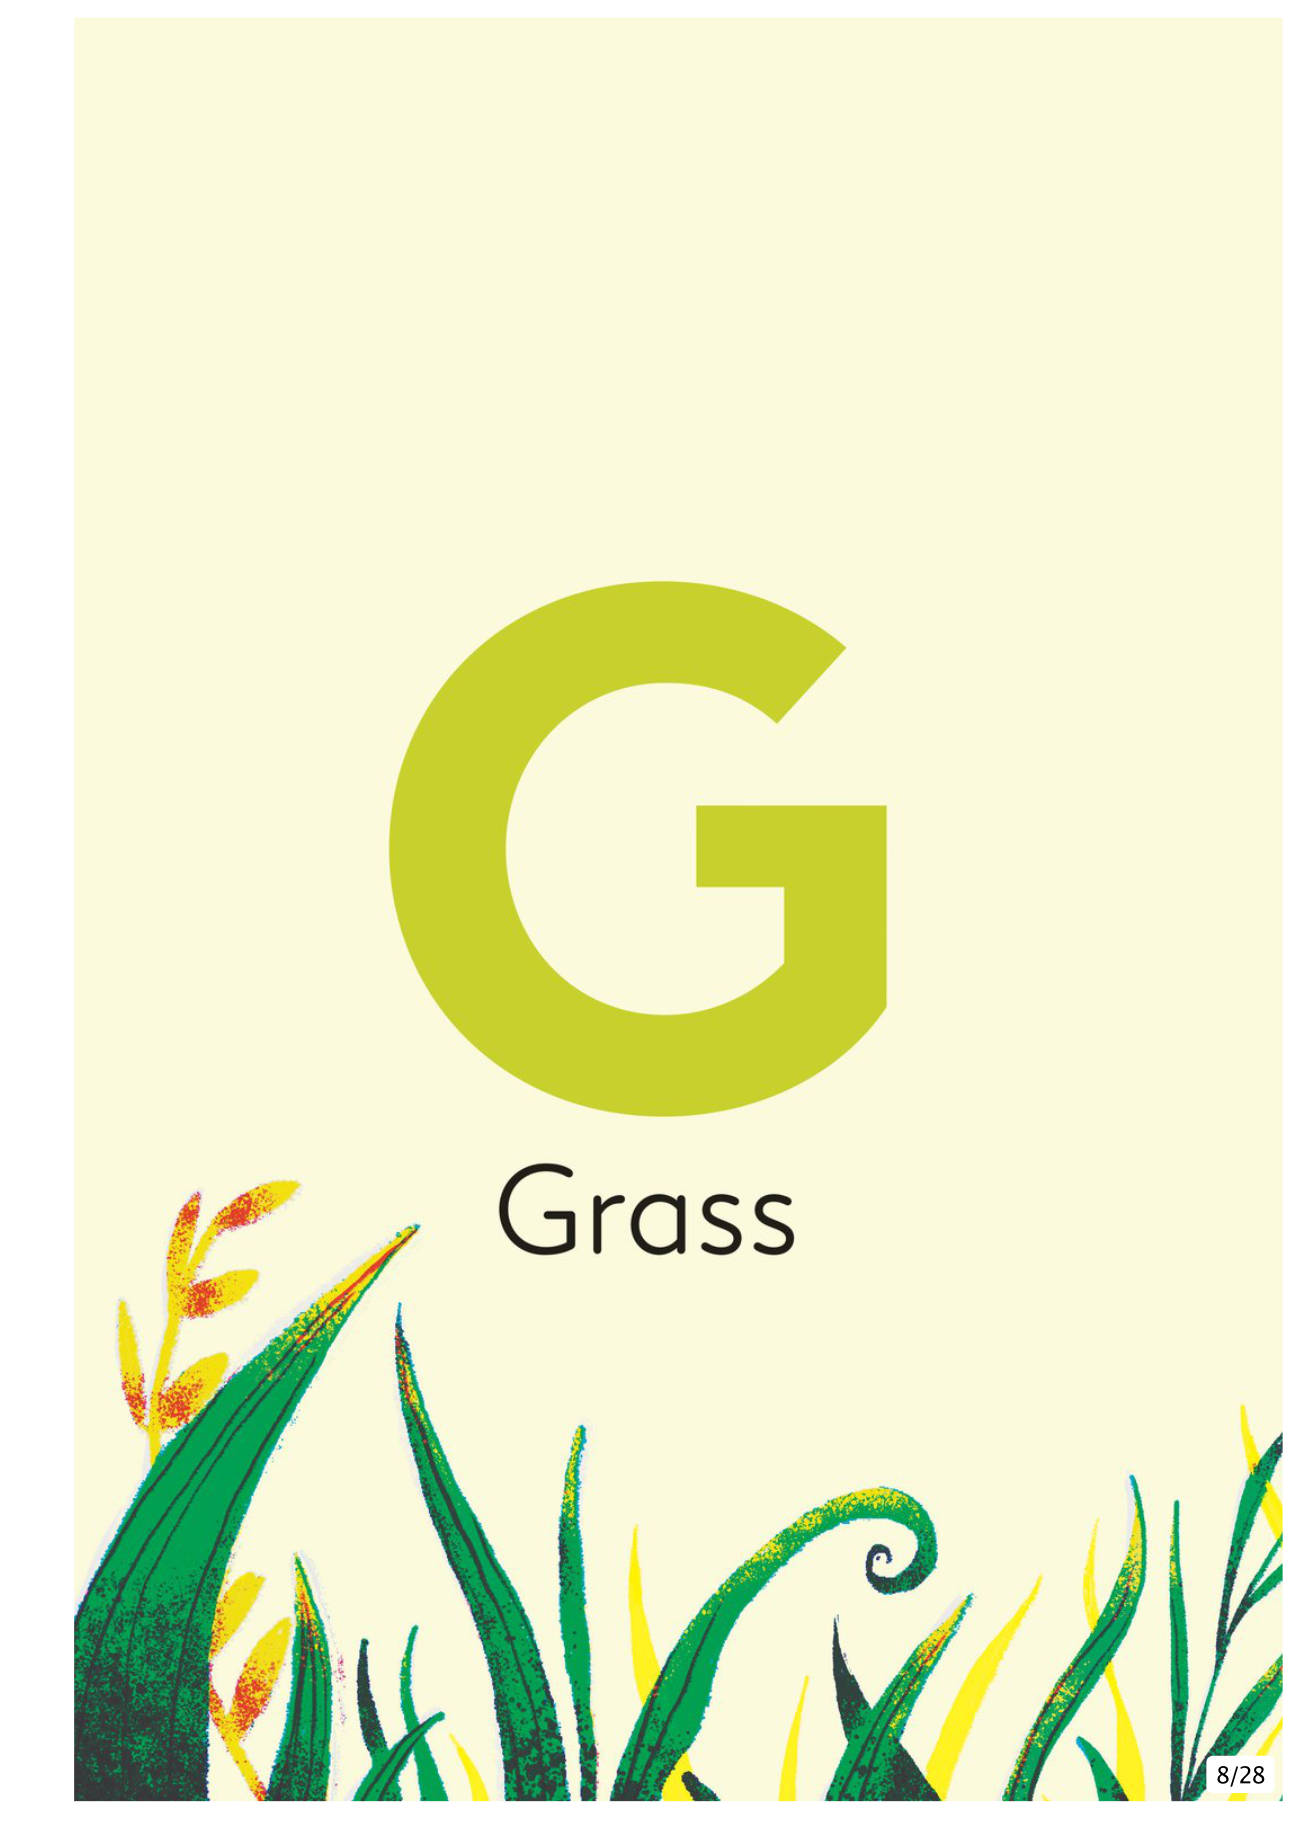 ABCD A Nature Alphabet Book Bedtime Stories and Learning g is for grass